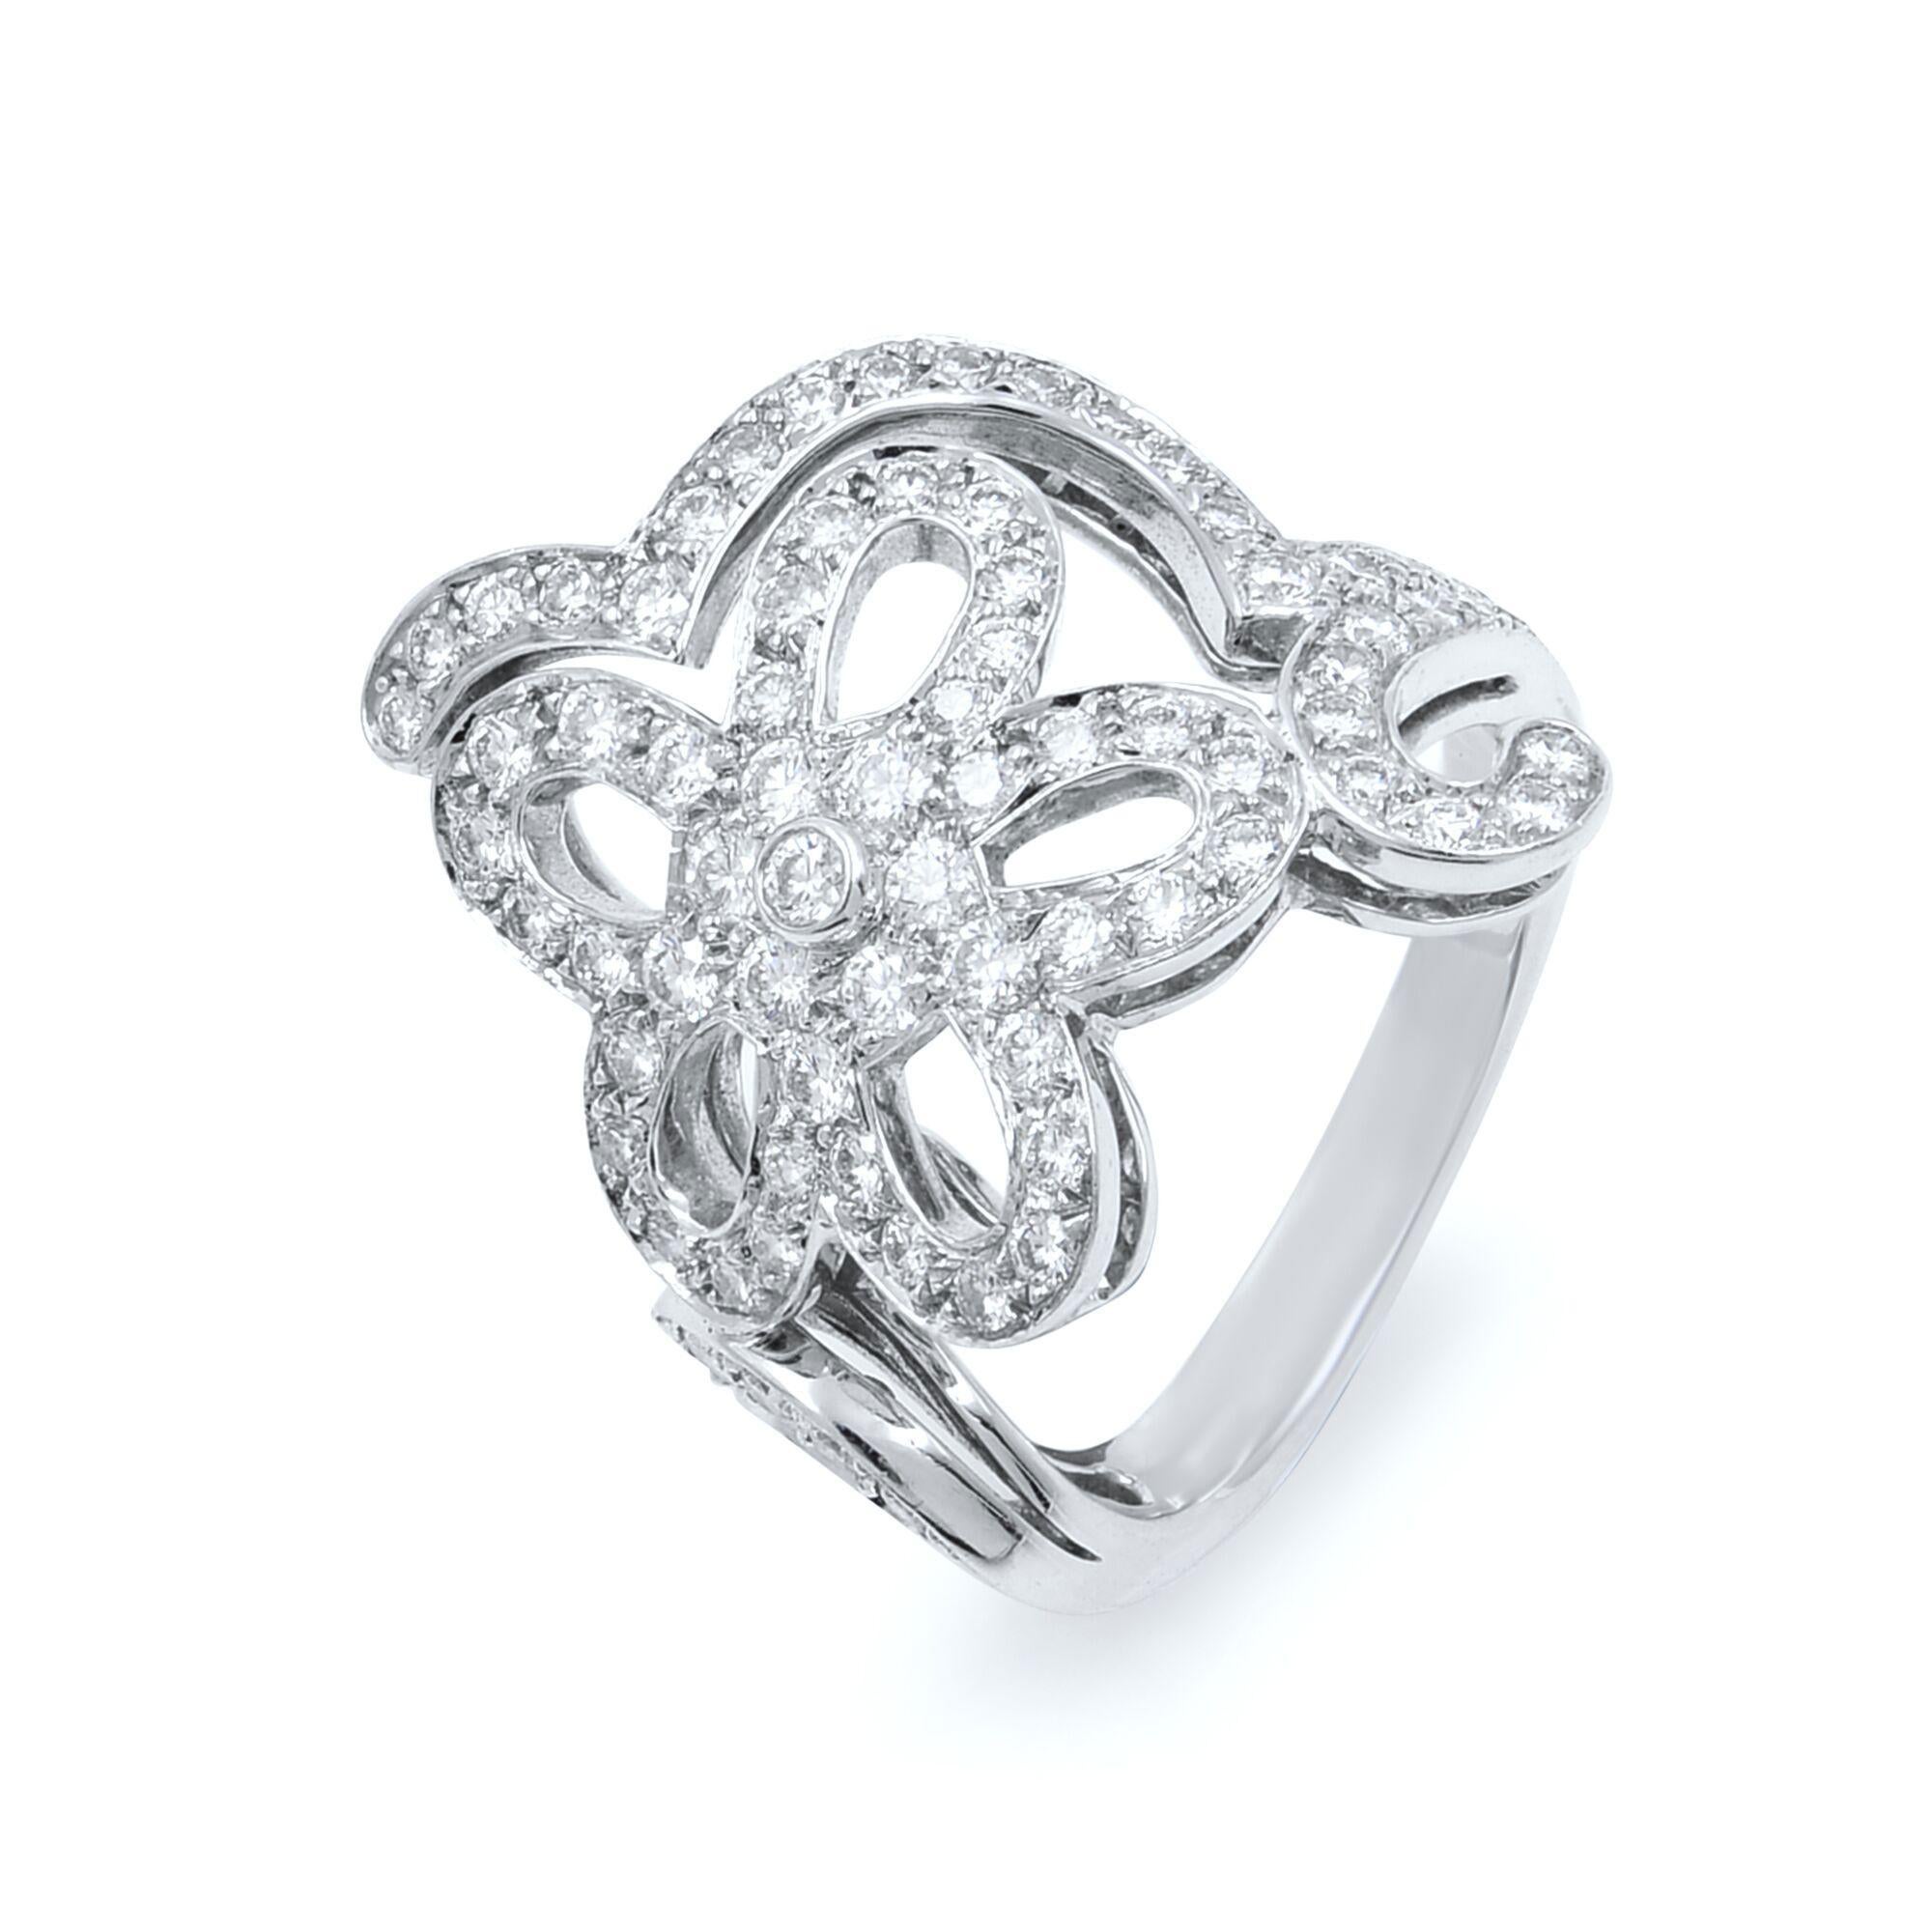 This beautiful Van Cleef & Arpels diamond floral ring is very rare and is now collectible item. Guarantee authentic in excellent pre-owned, condition recently polished and ready to wear. This piece is set with approximately 1.56cttw of round cut